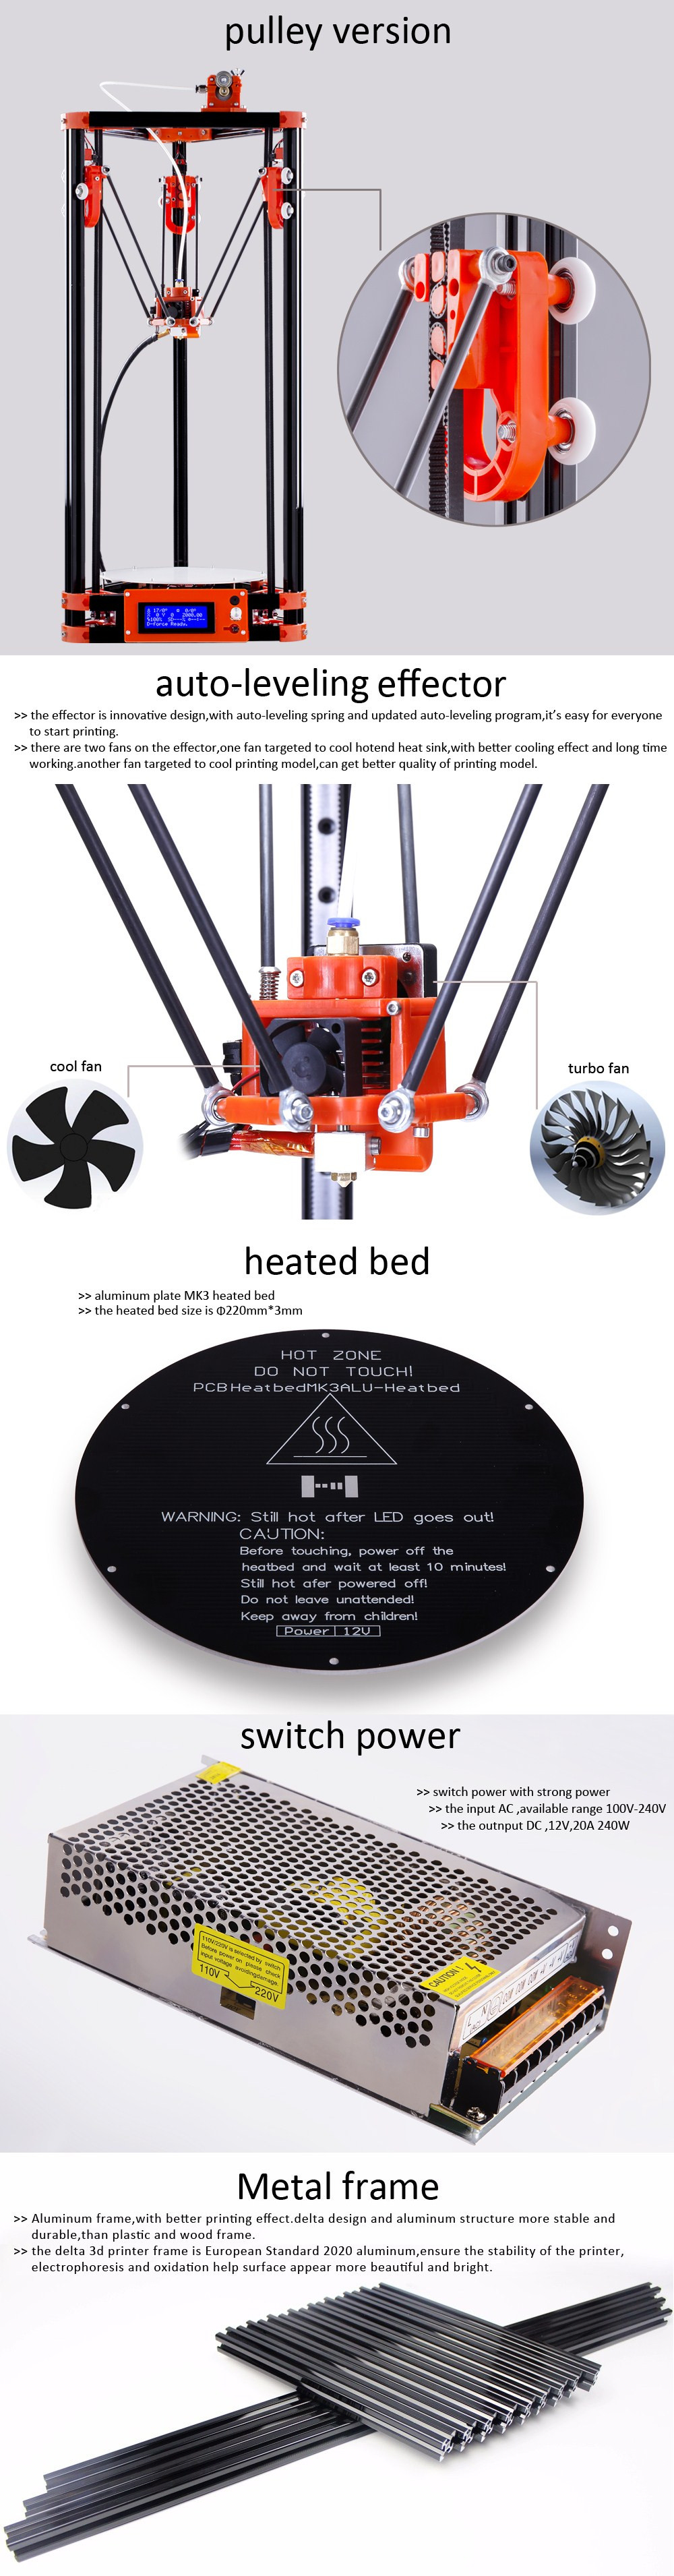 FLSUN® Delta Kossel 3D Printer 180*315mm Printing Size With Auto-leveling Dual Cooling Fans Heated Bed 1.75mm 0.4mm Nozzle 9